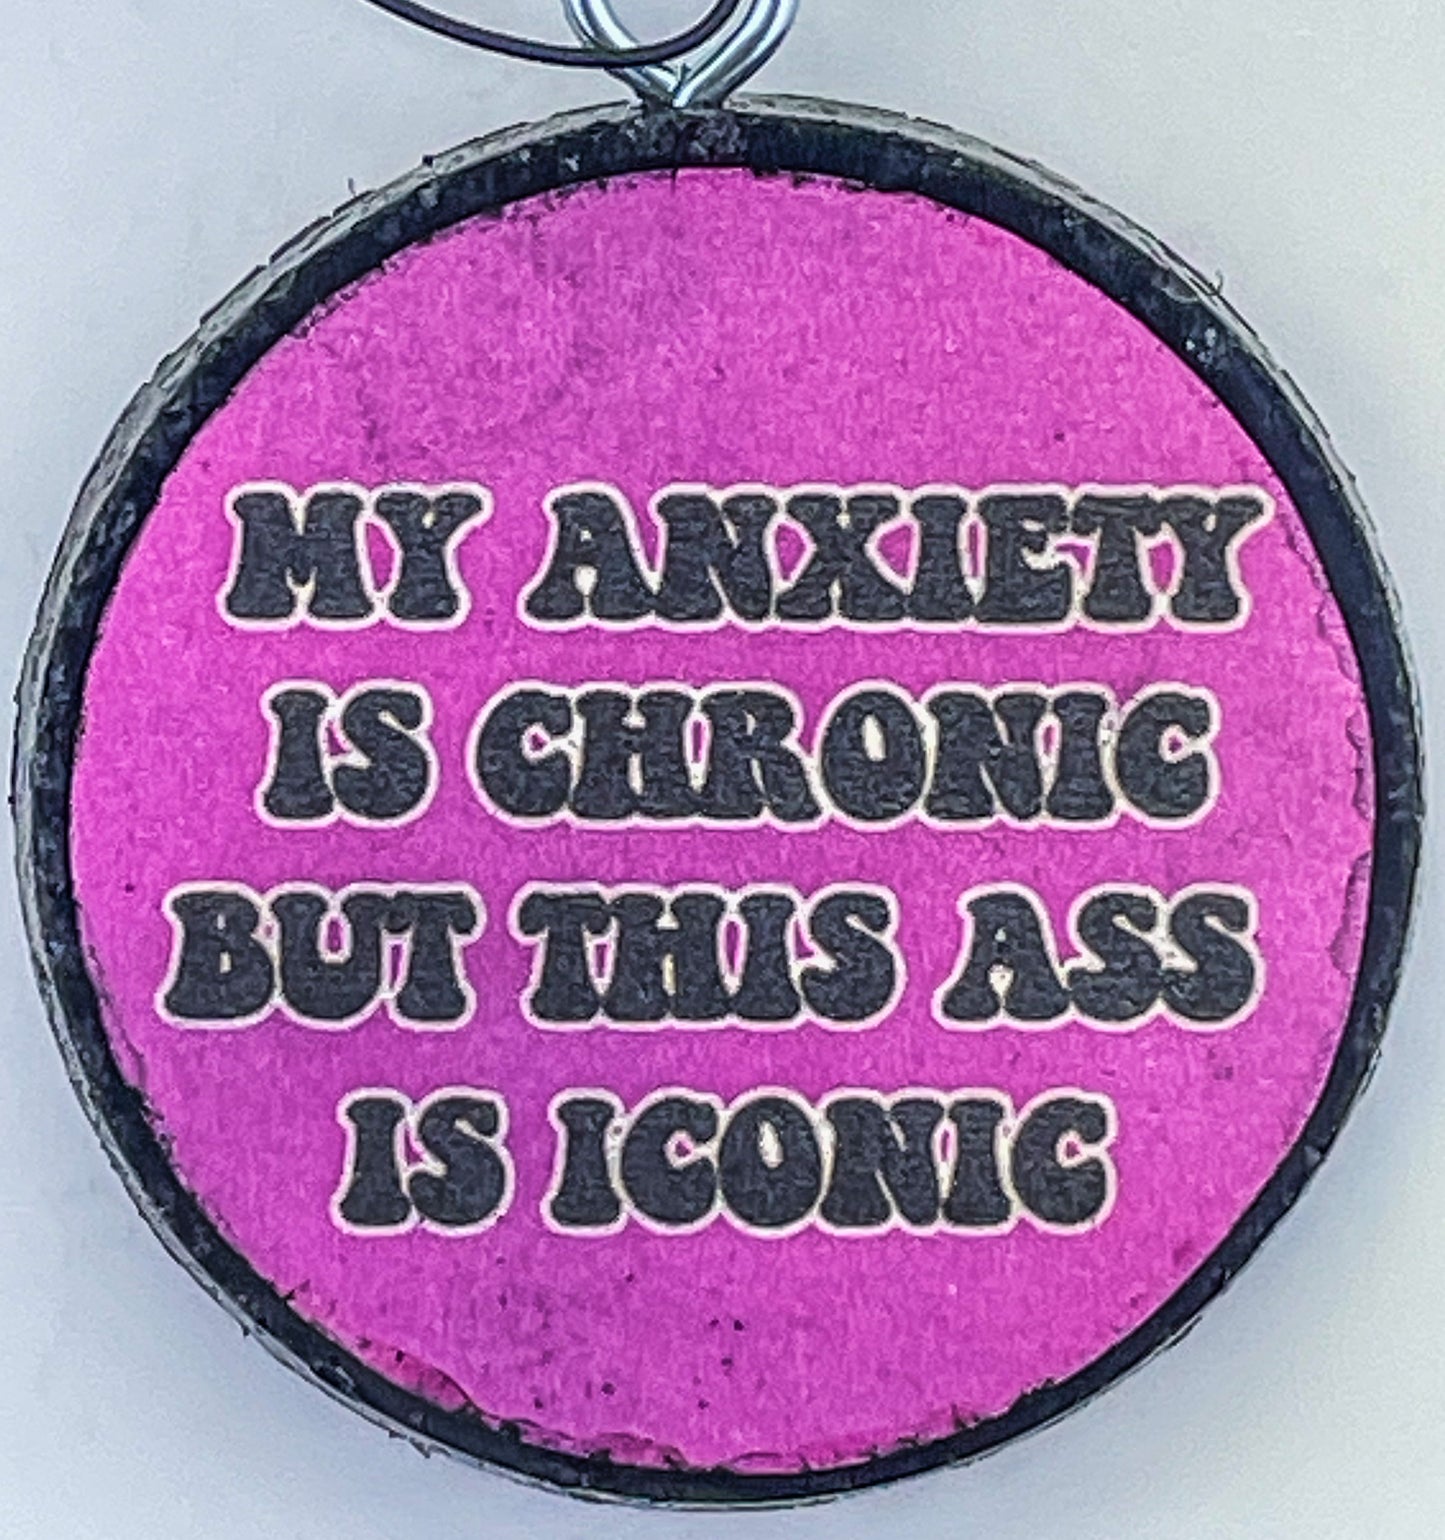 MY ANXIETY IS CHRONIC BUT THIS ASS IS ICONIC